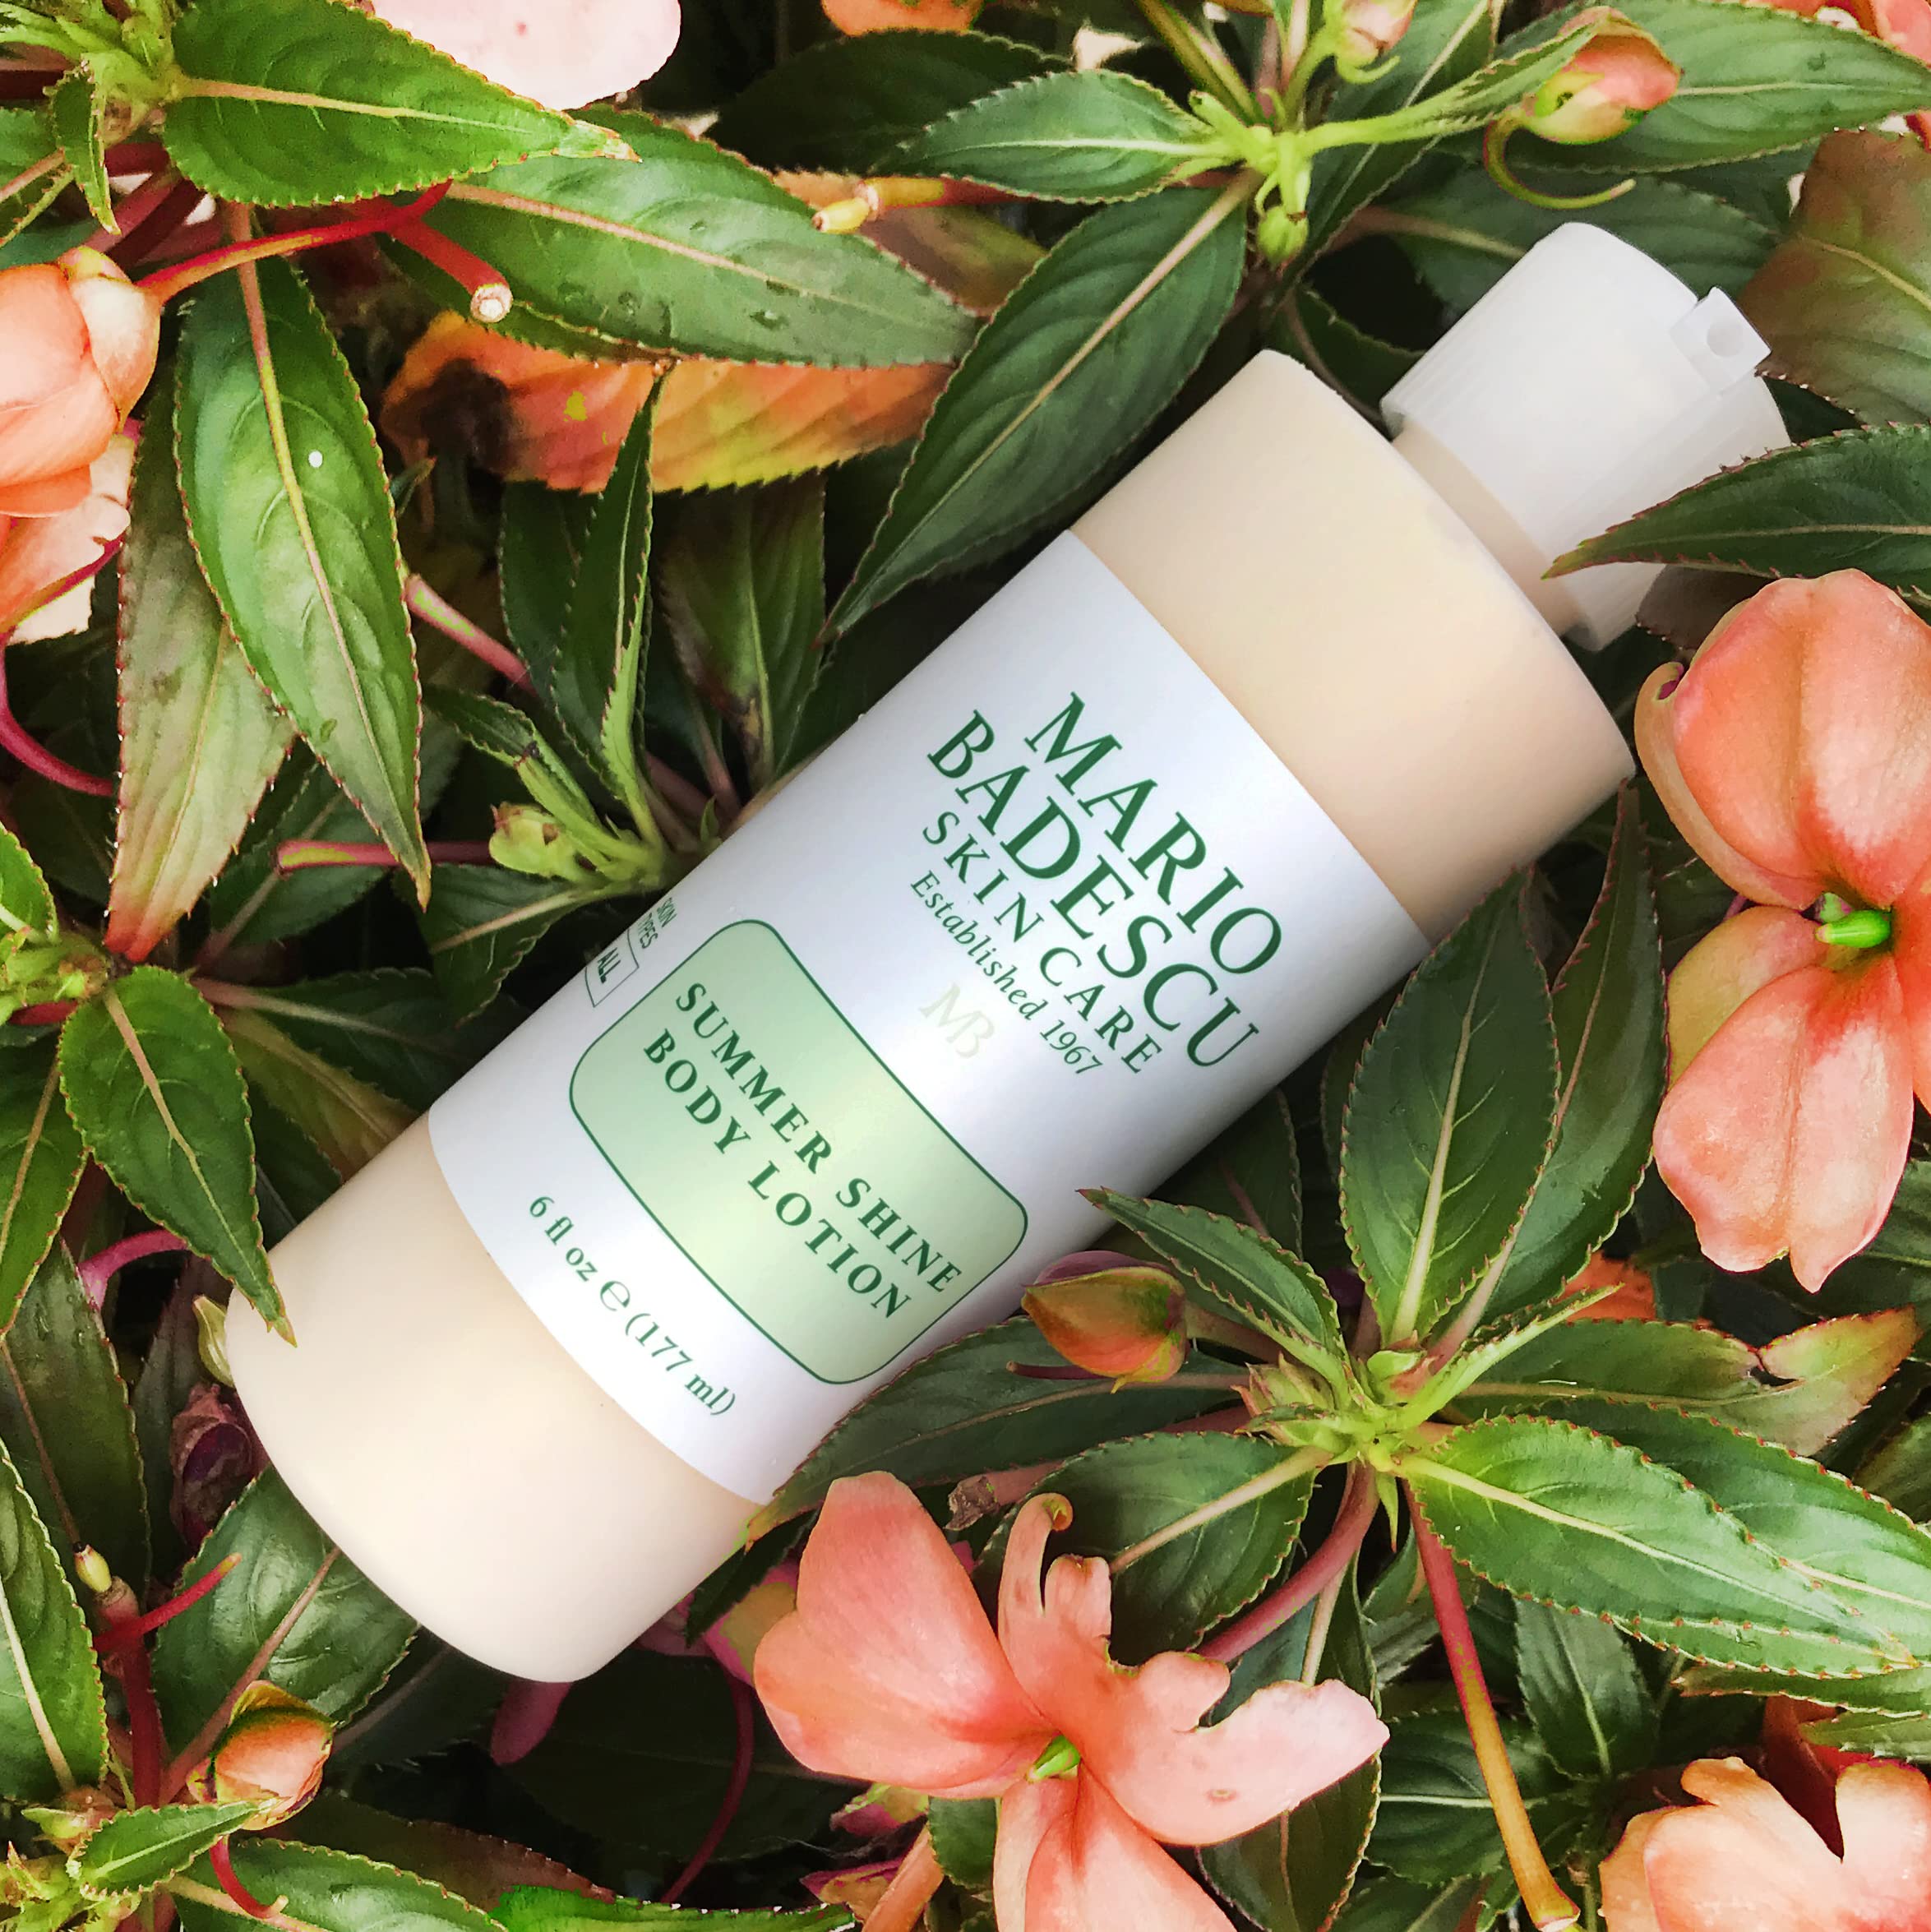 Mario Badescu Summer Shine Body Lotion Enriched with Vitamin A, Lightweight and Radiant, Non-Greasy Candlelit Glow Body Shimmer, Ideal for All Skin Types